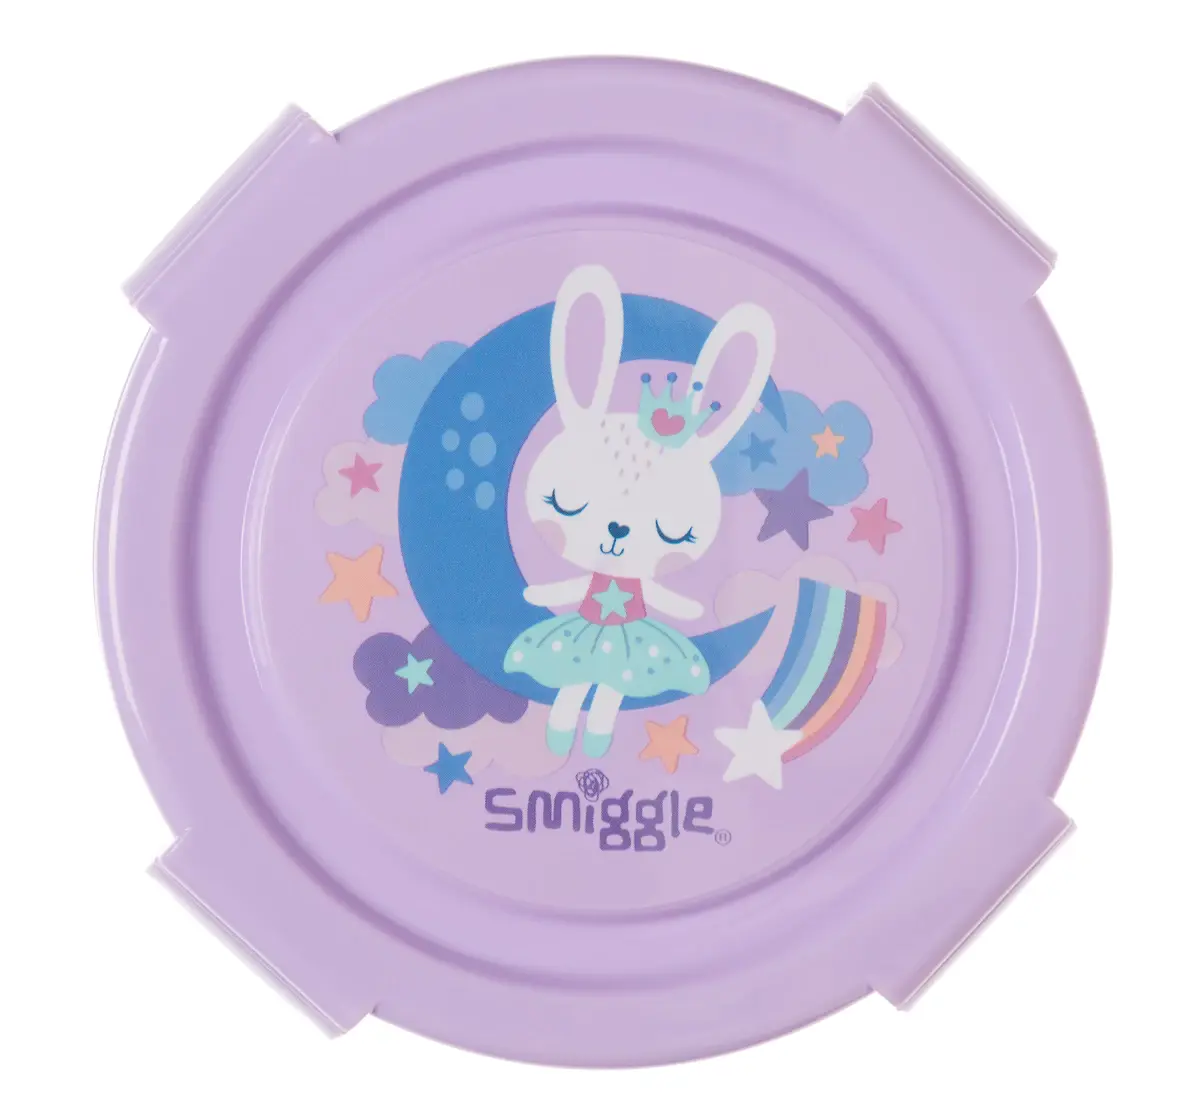 Smiggle Round About Snack Container, Round, Lilac, 3Y+